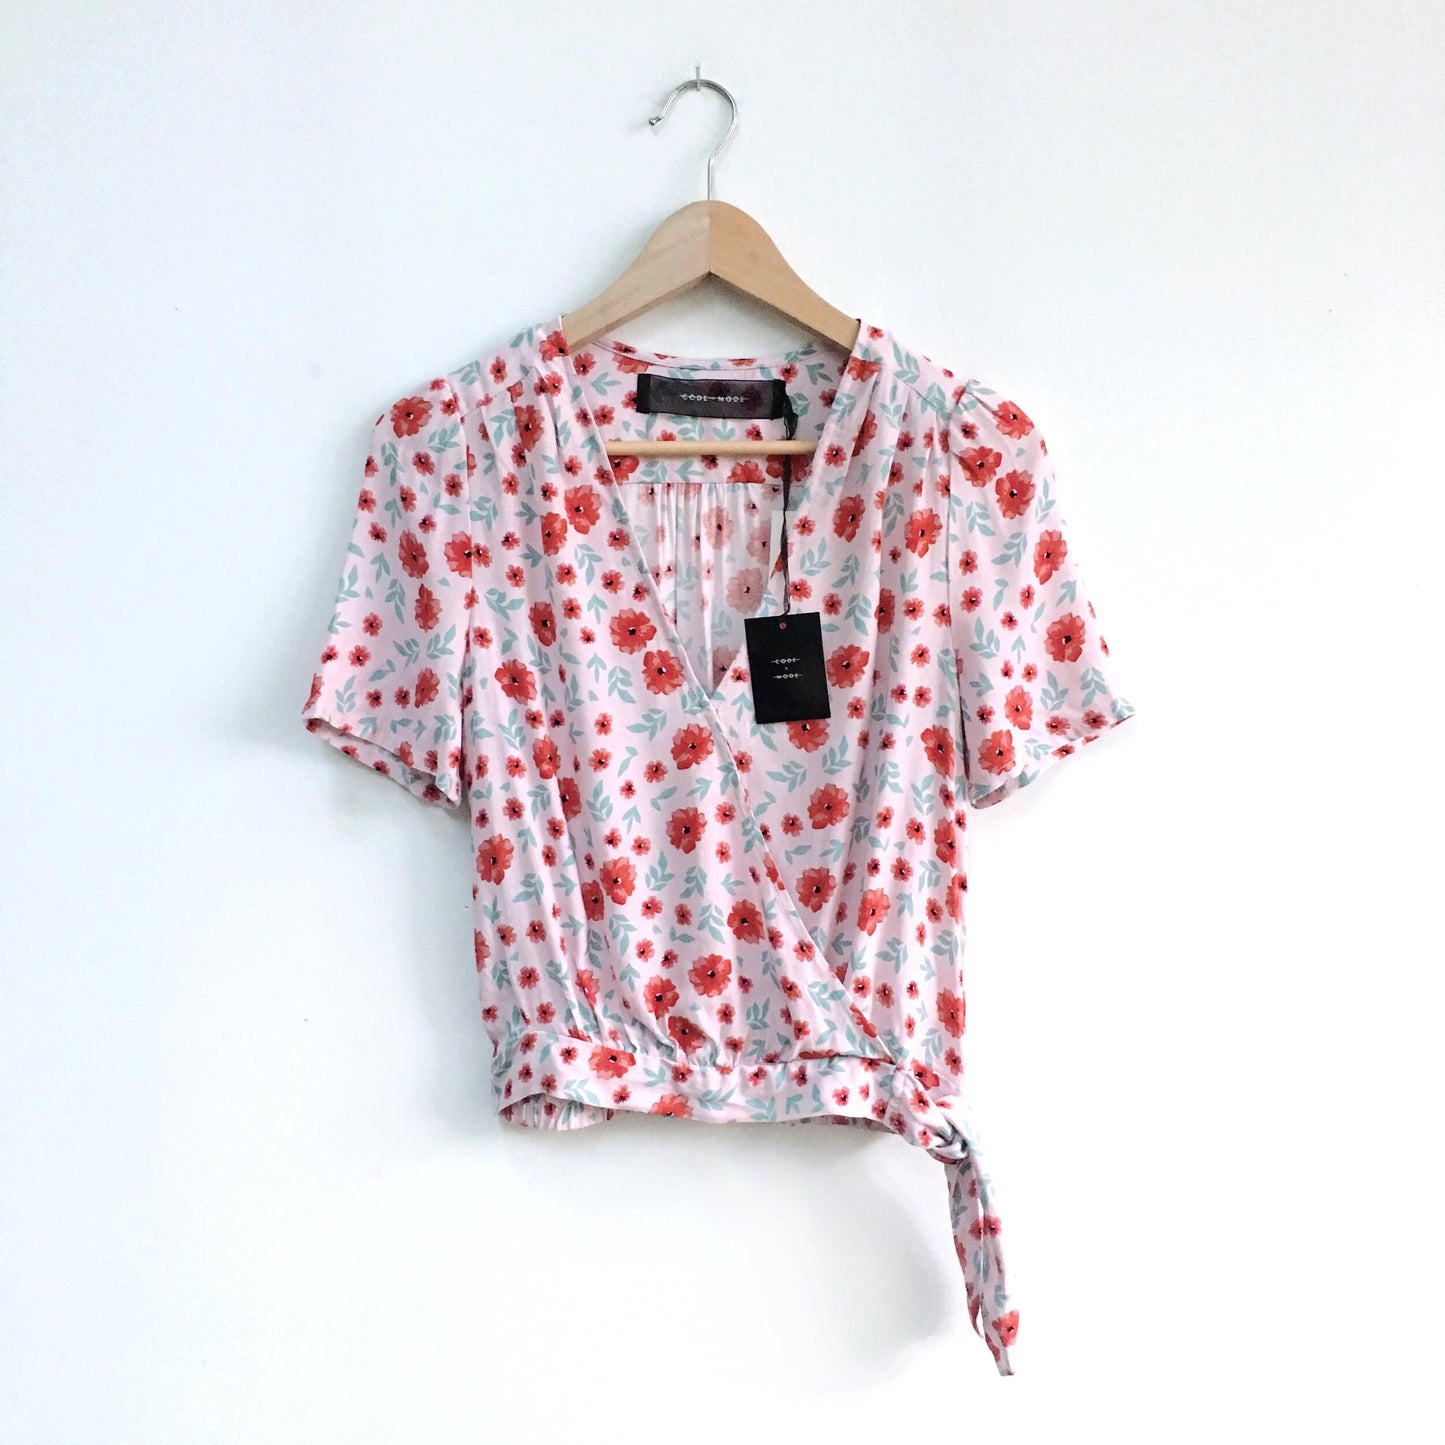 CODExMODE Floral side-tie top - size xs